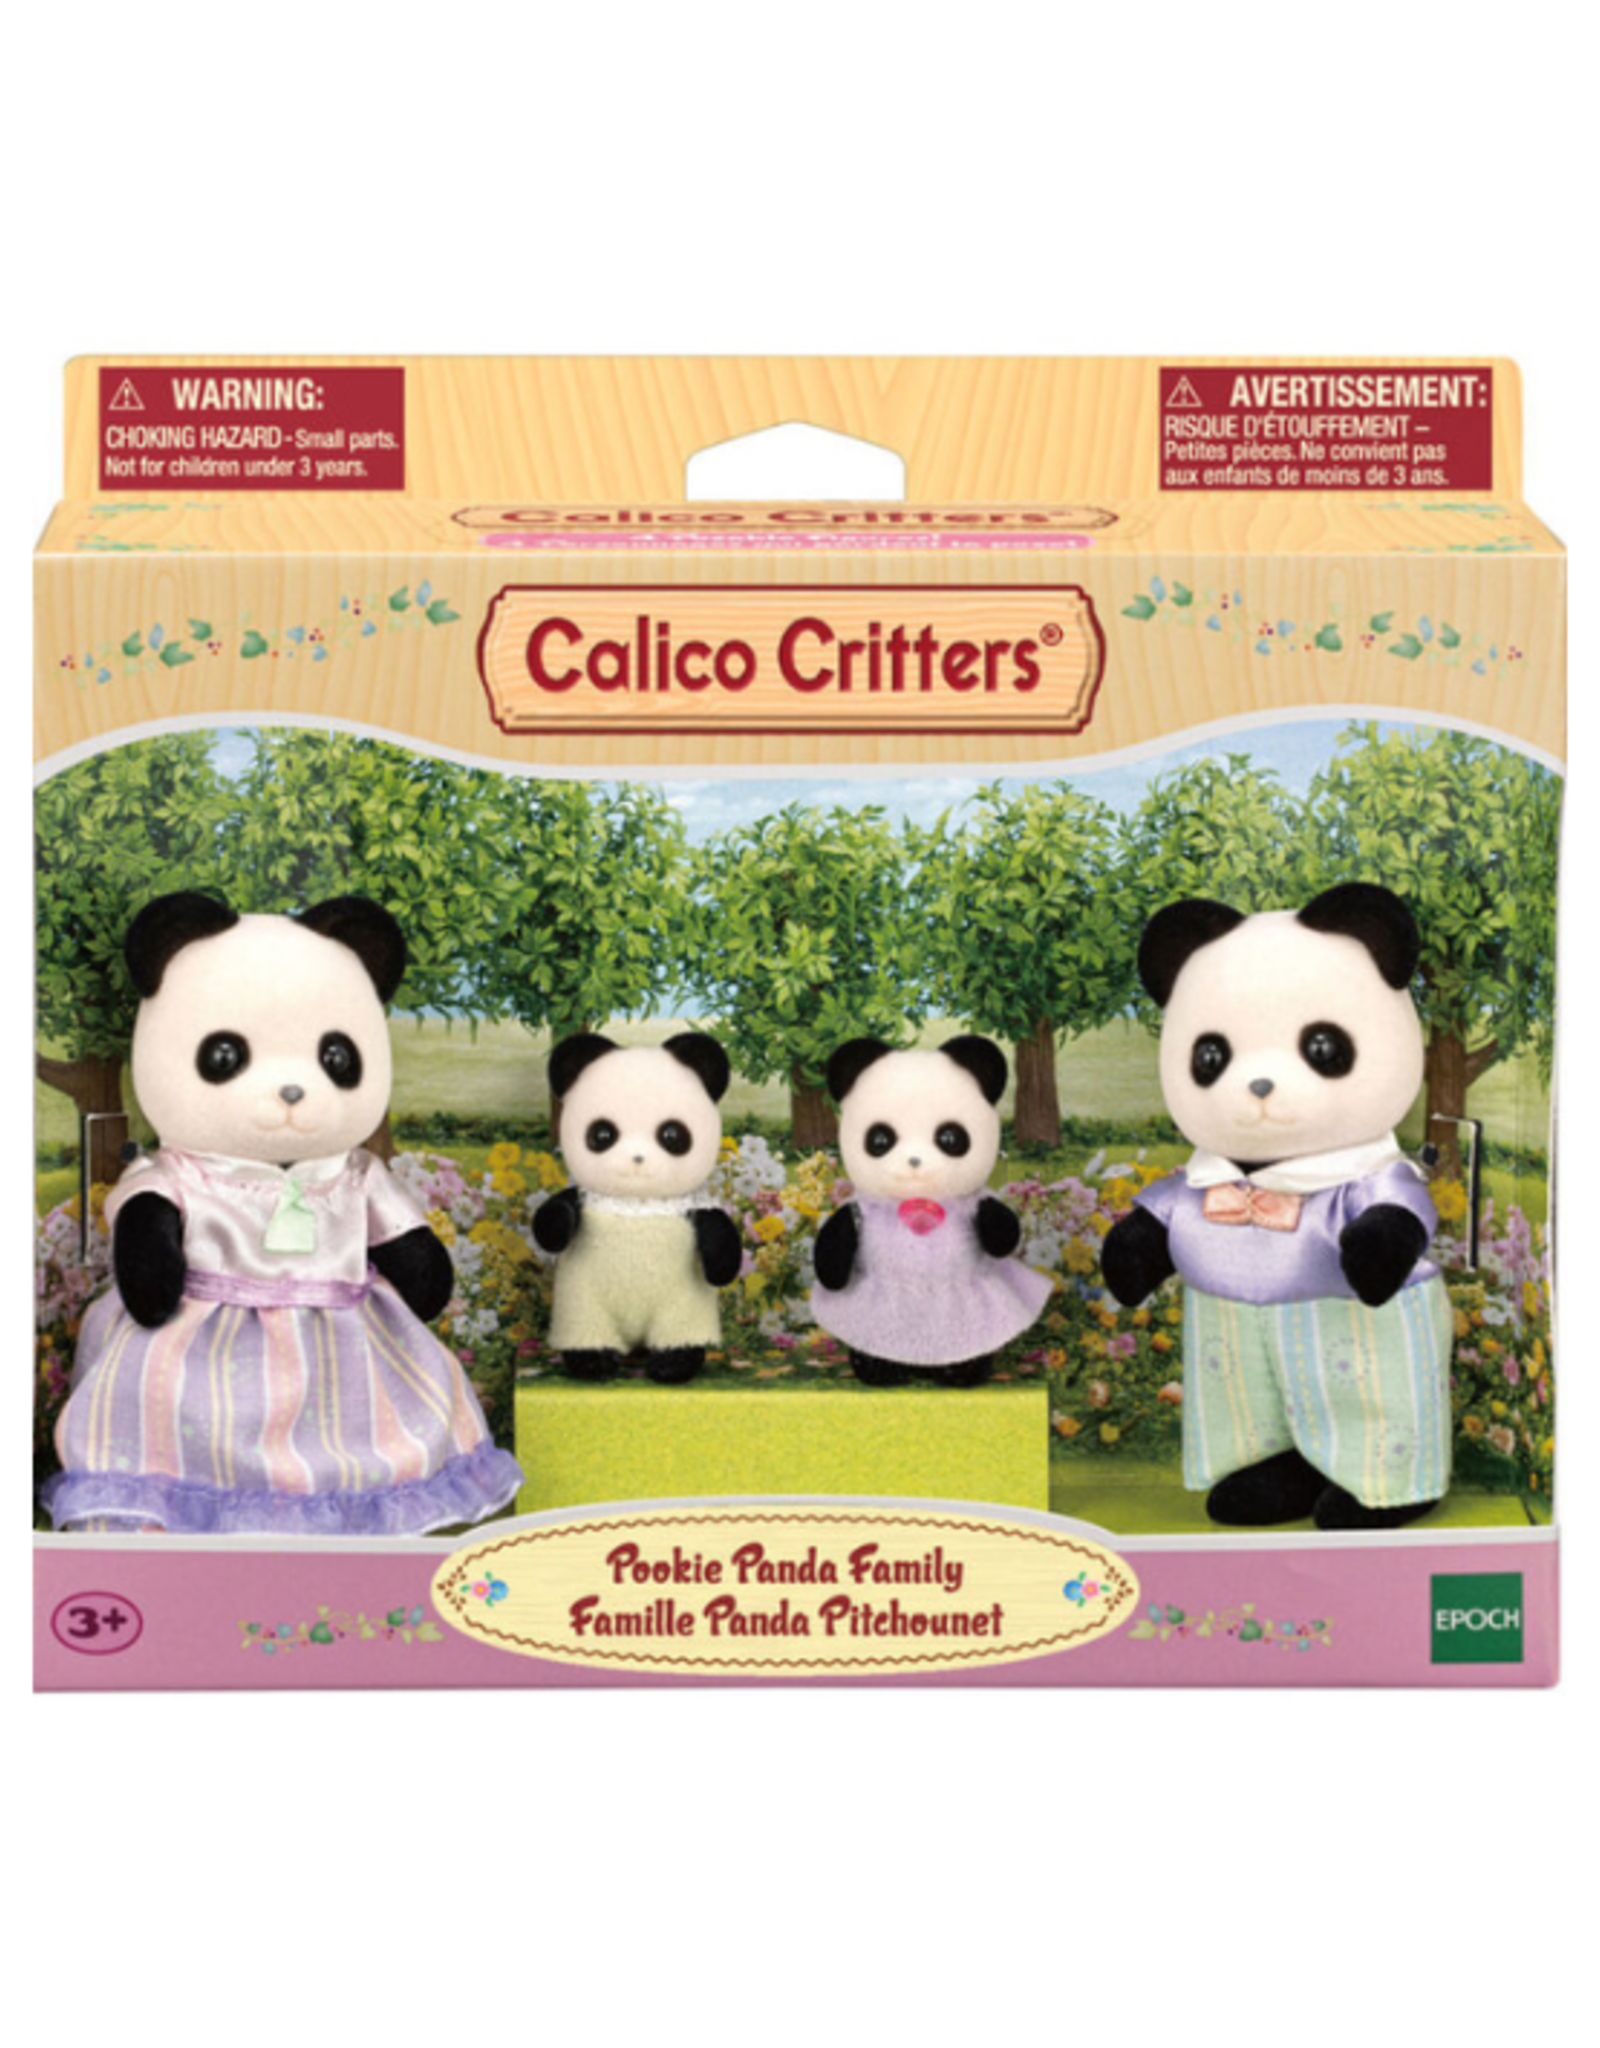 Calico Critters Calico Critters - Pookie Panda Family